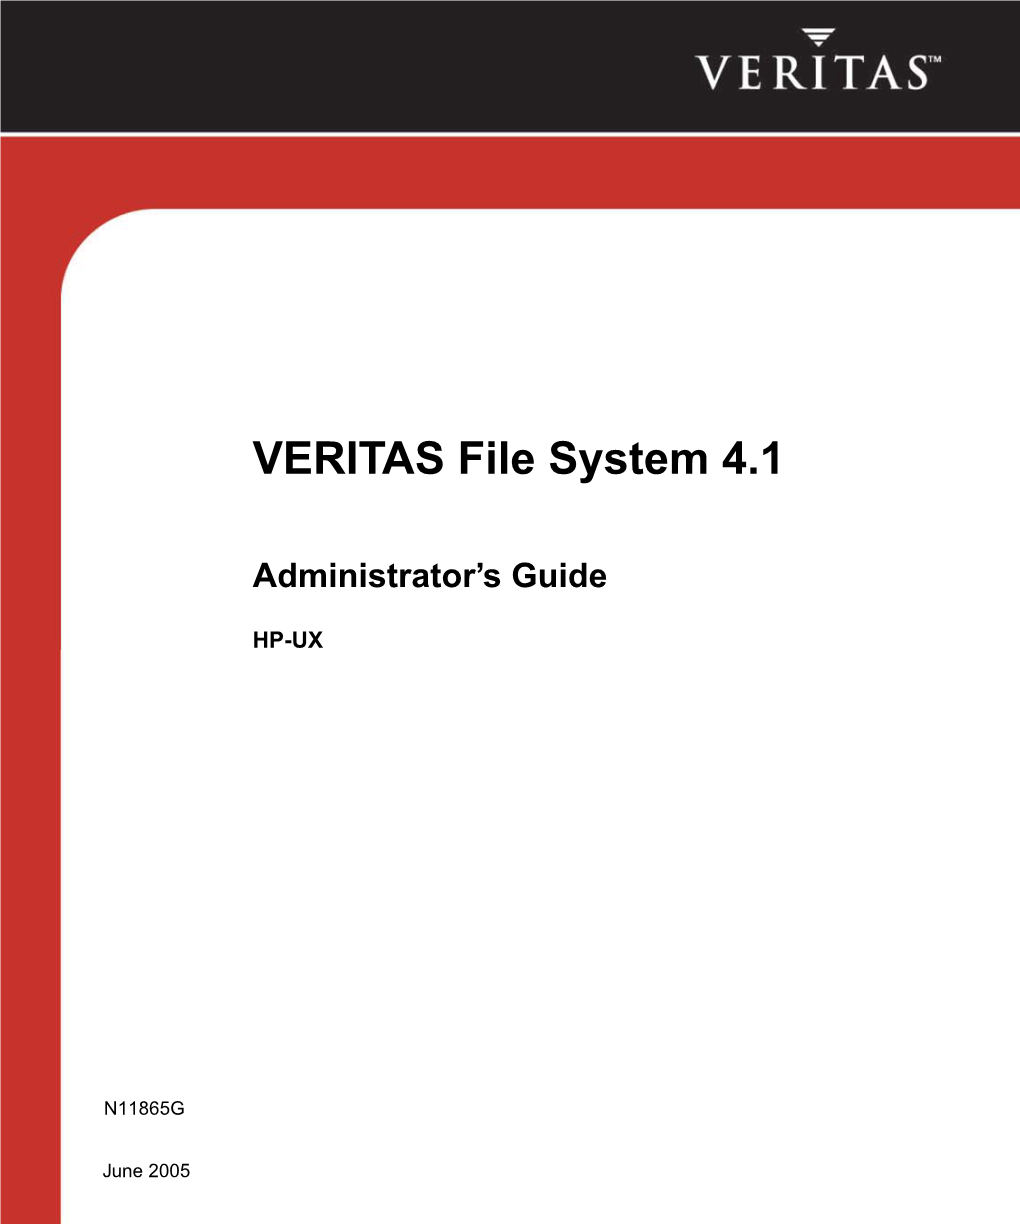 File System Administrator's Guide